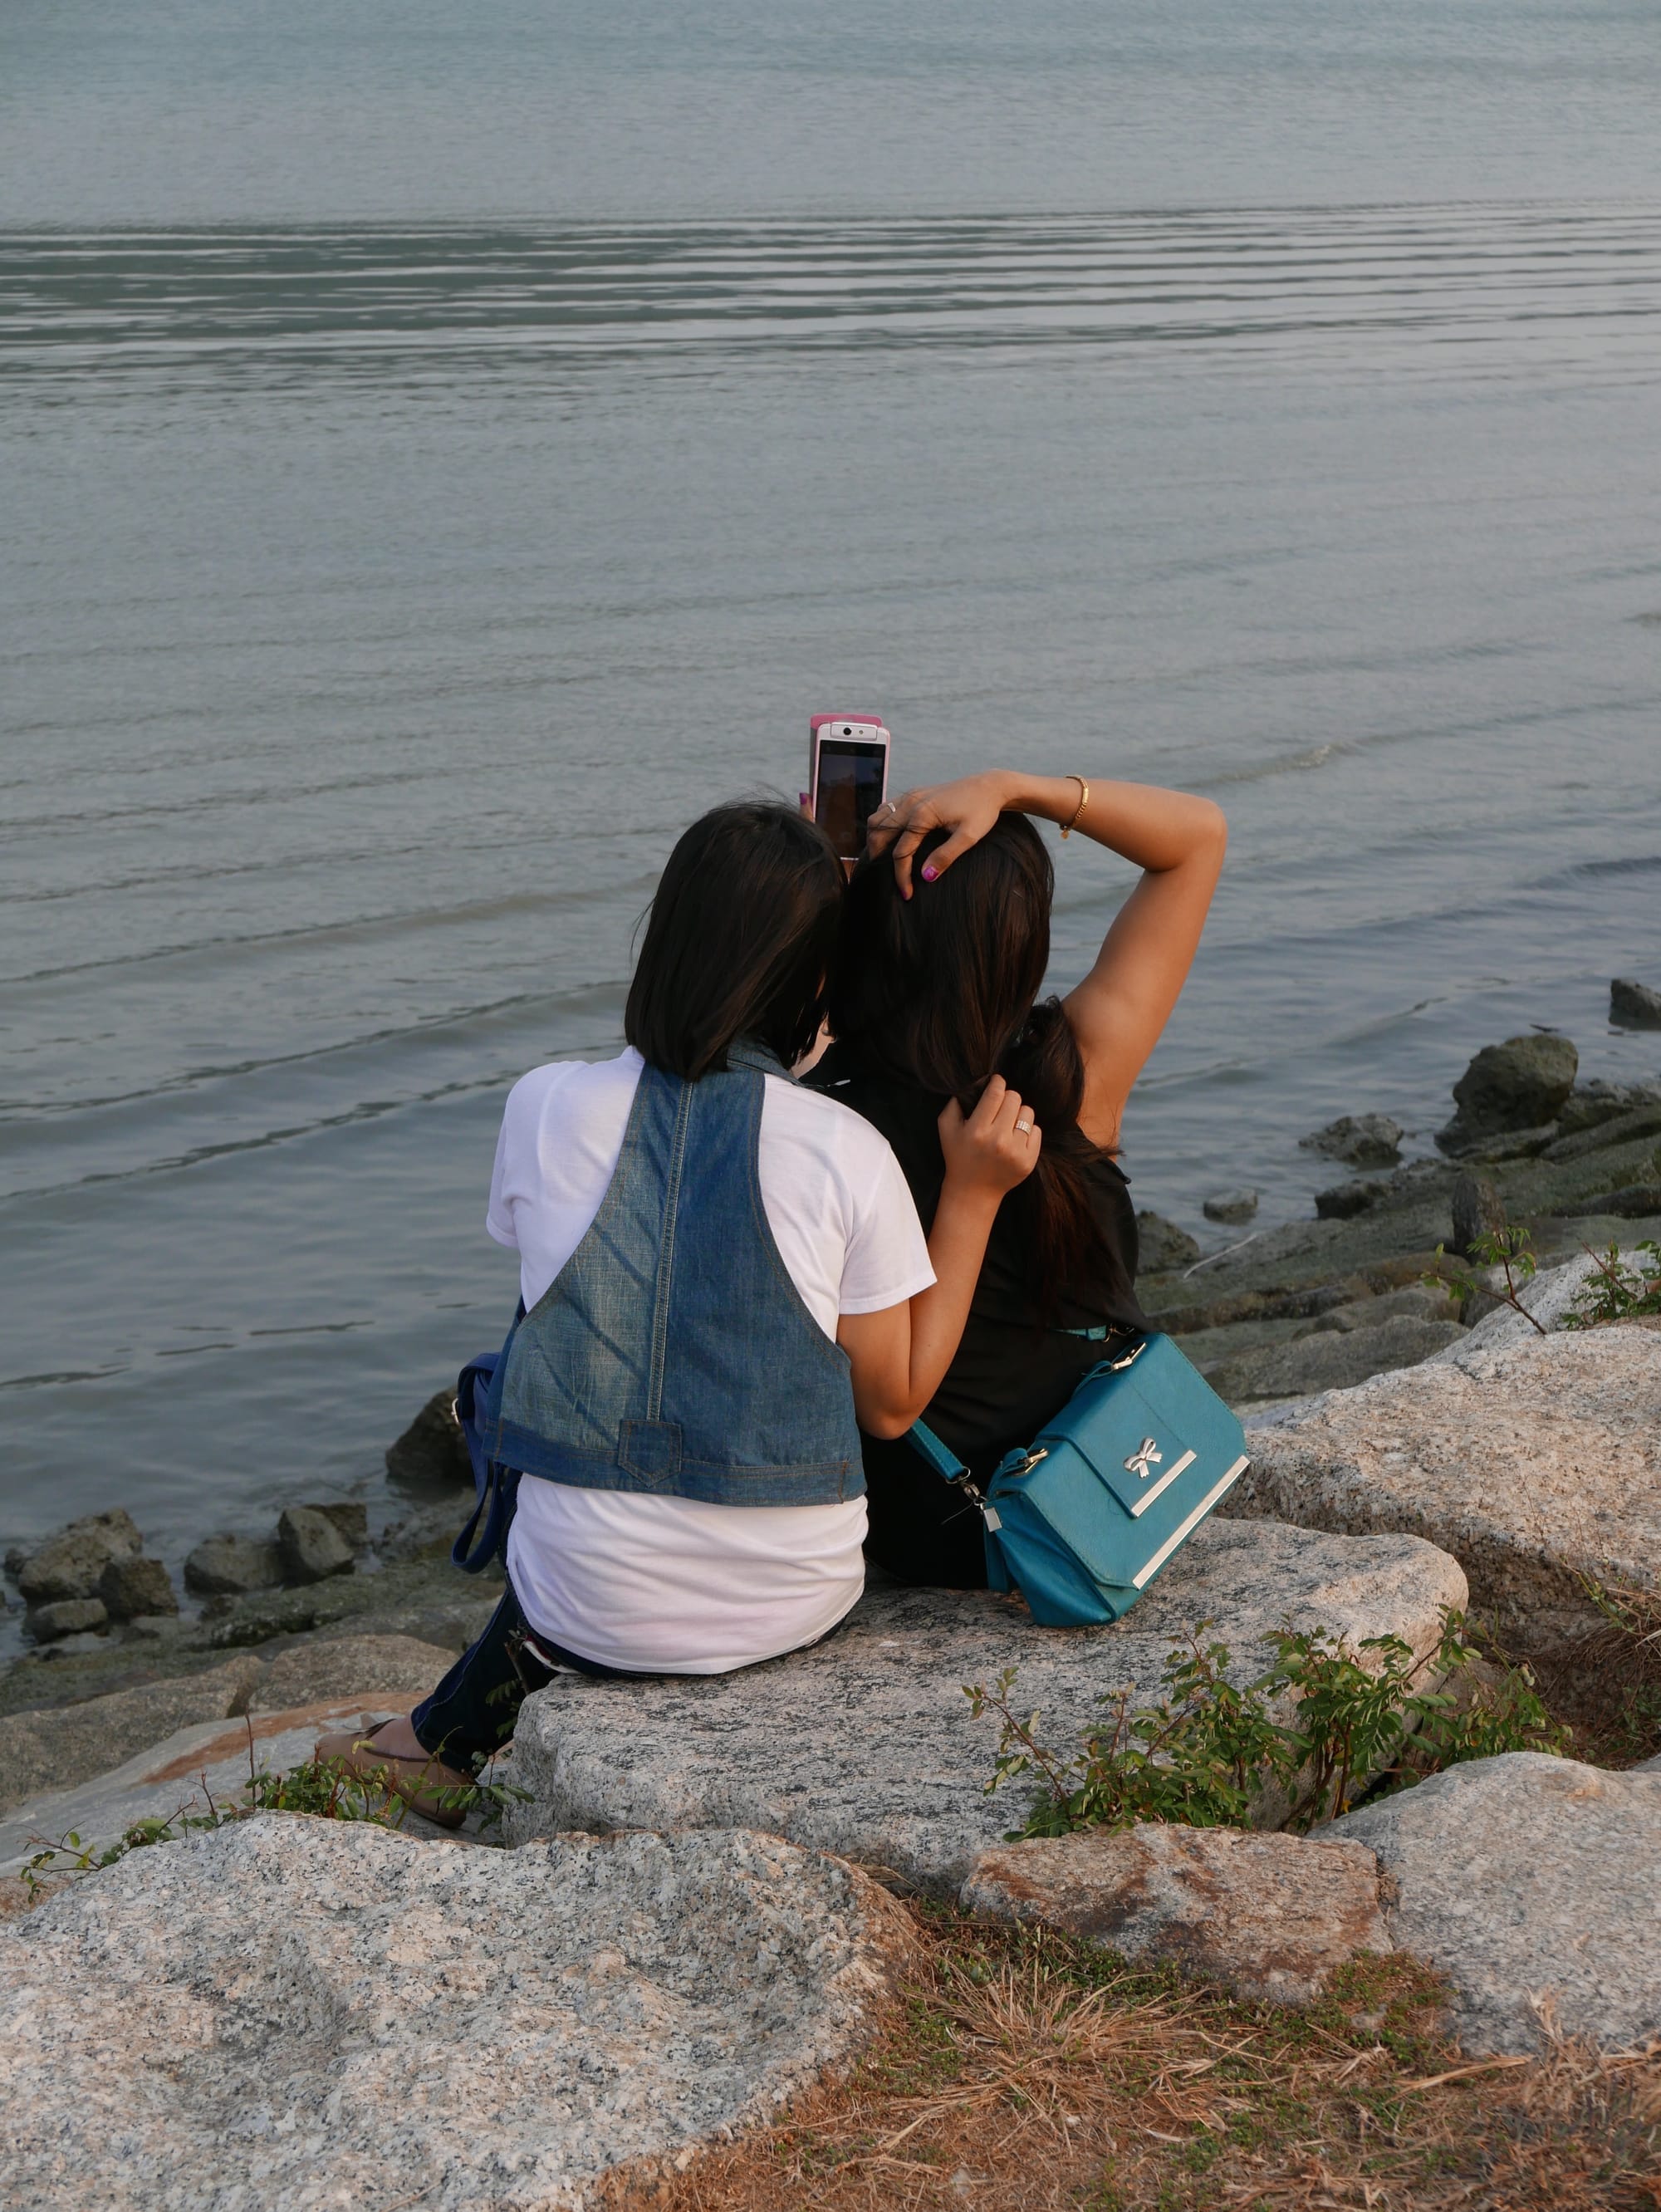 Photo by Author — selfie at the Queensbay Seaside, Bayan Lepas, Penang, Malaysia